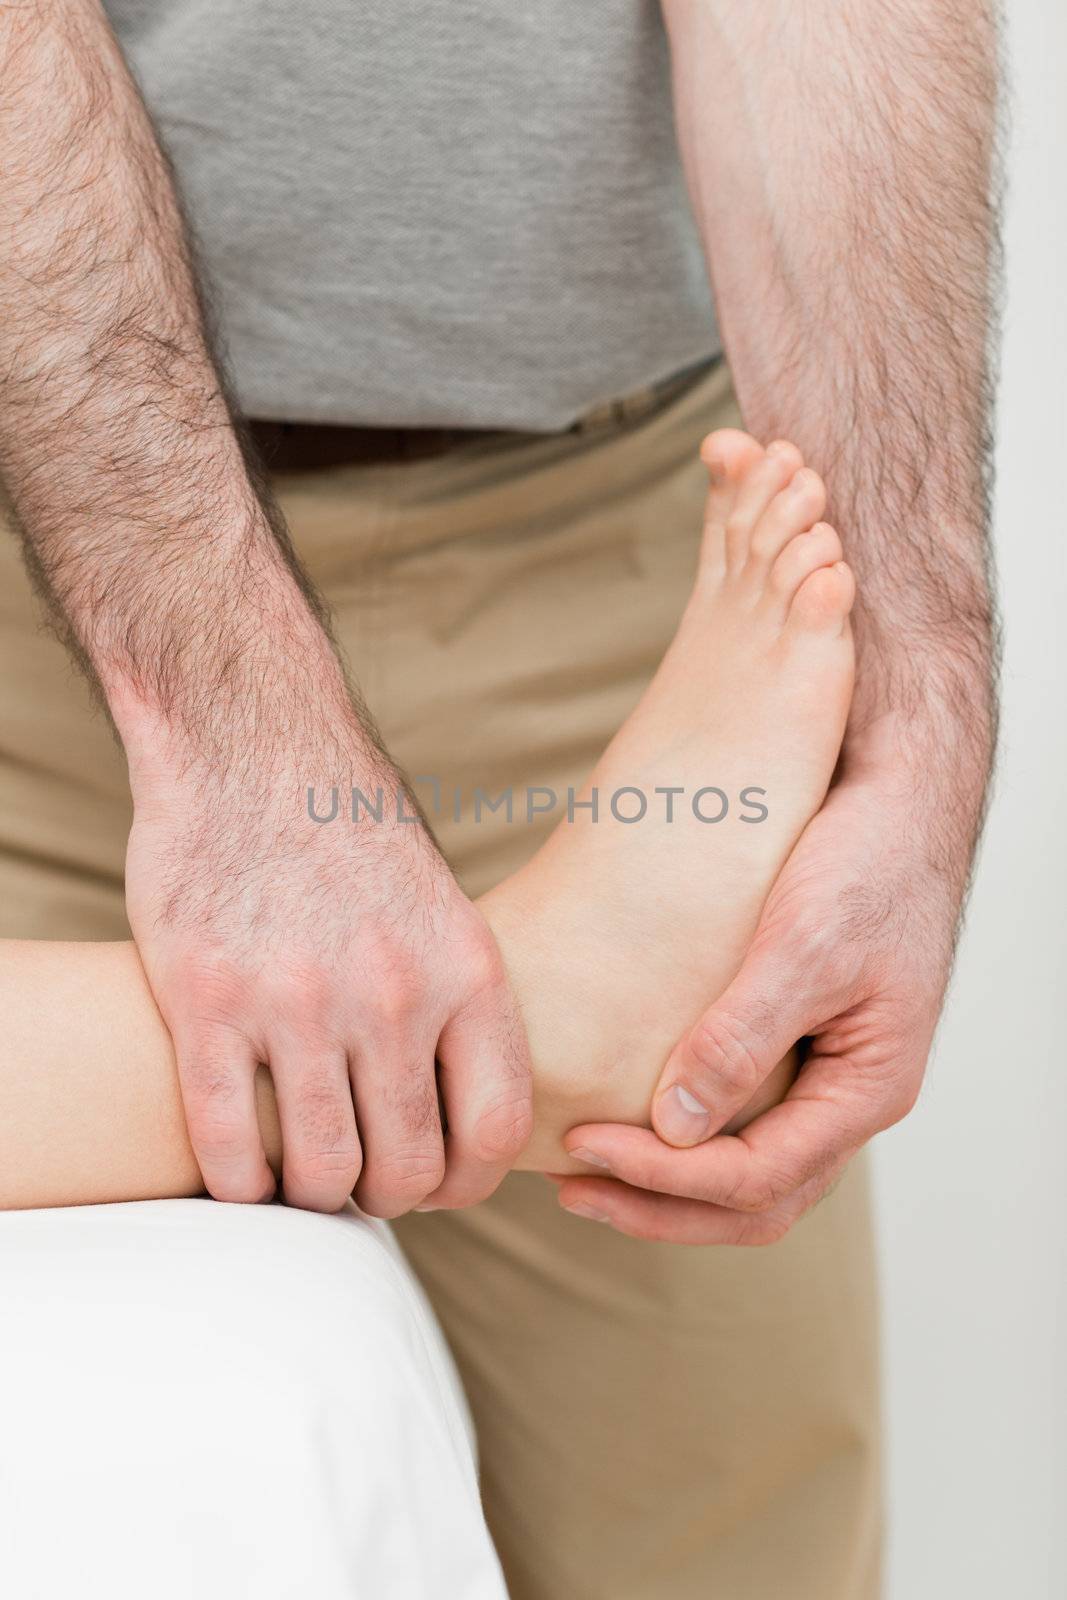 Foot being manipulated by a practitioner in a room